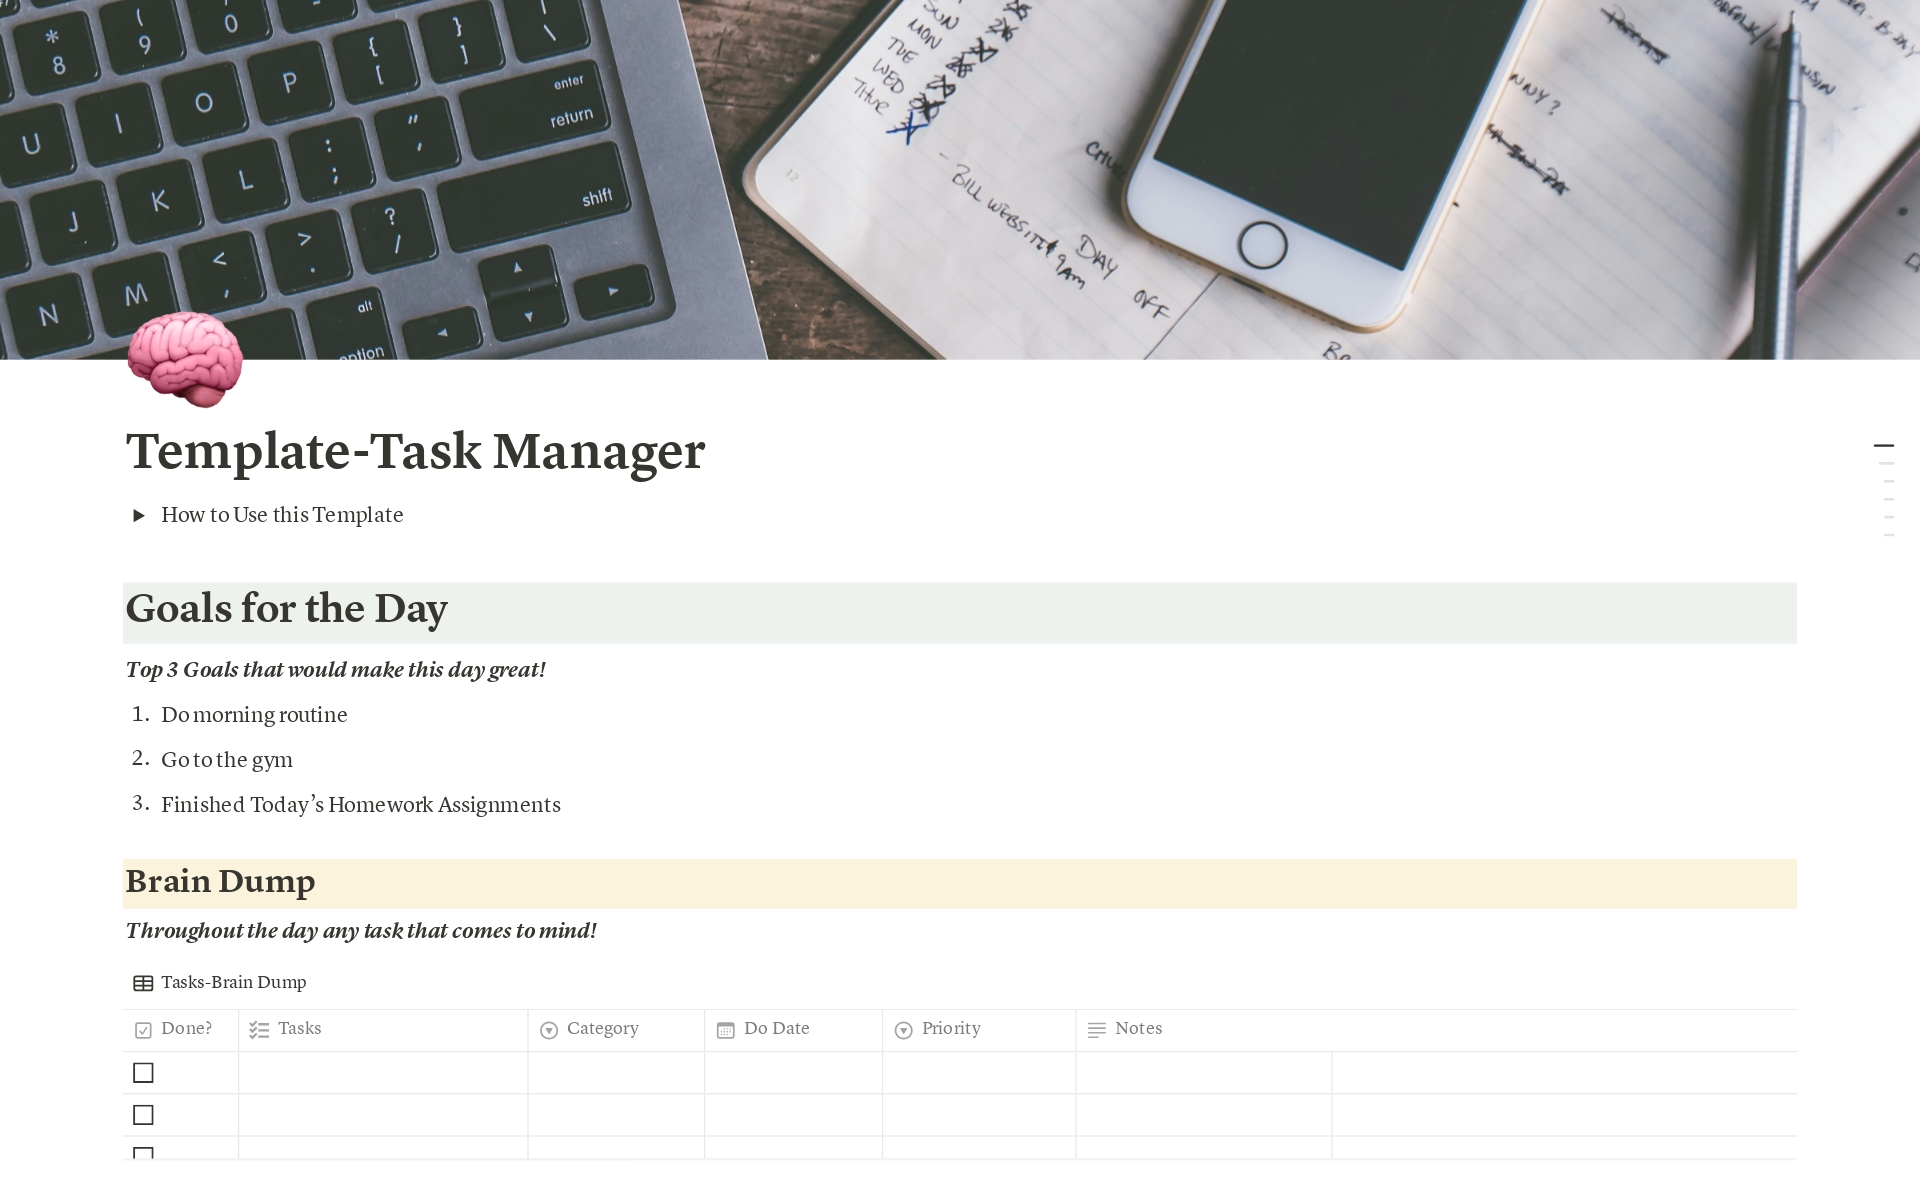 Task manager that can be customized to fit a personal, work, and or school schedule. Be able to complete tasks efficiently and effortlessly. Includes a comprehensive tool for sorting, highlighting, organizing, and more. Make life simple.